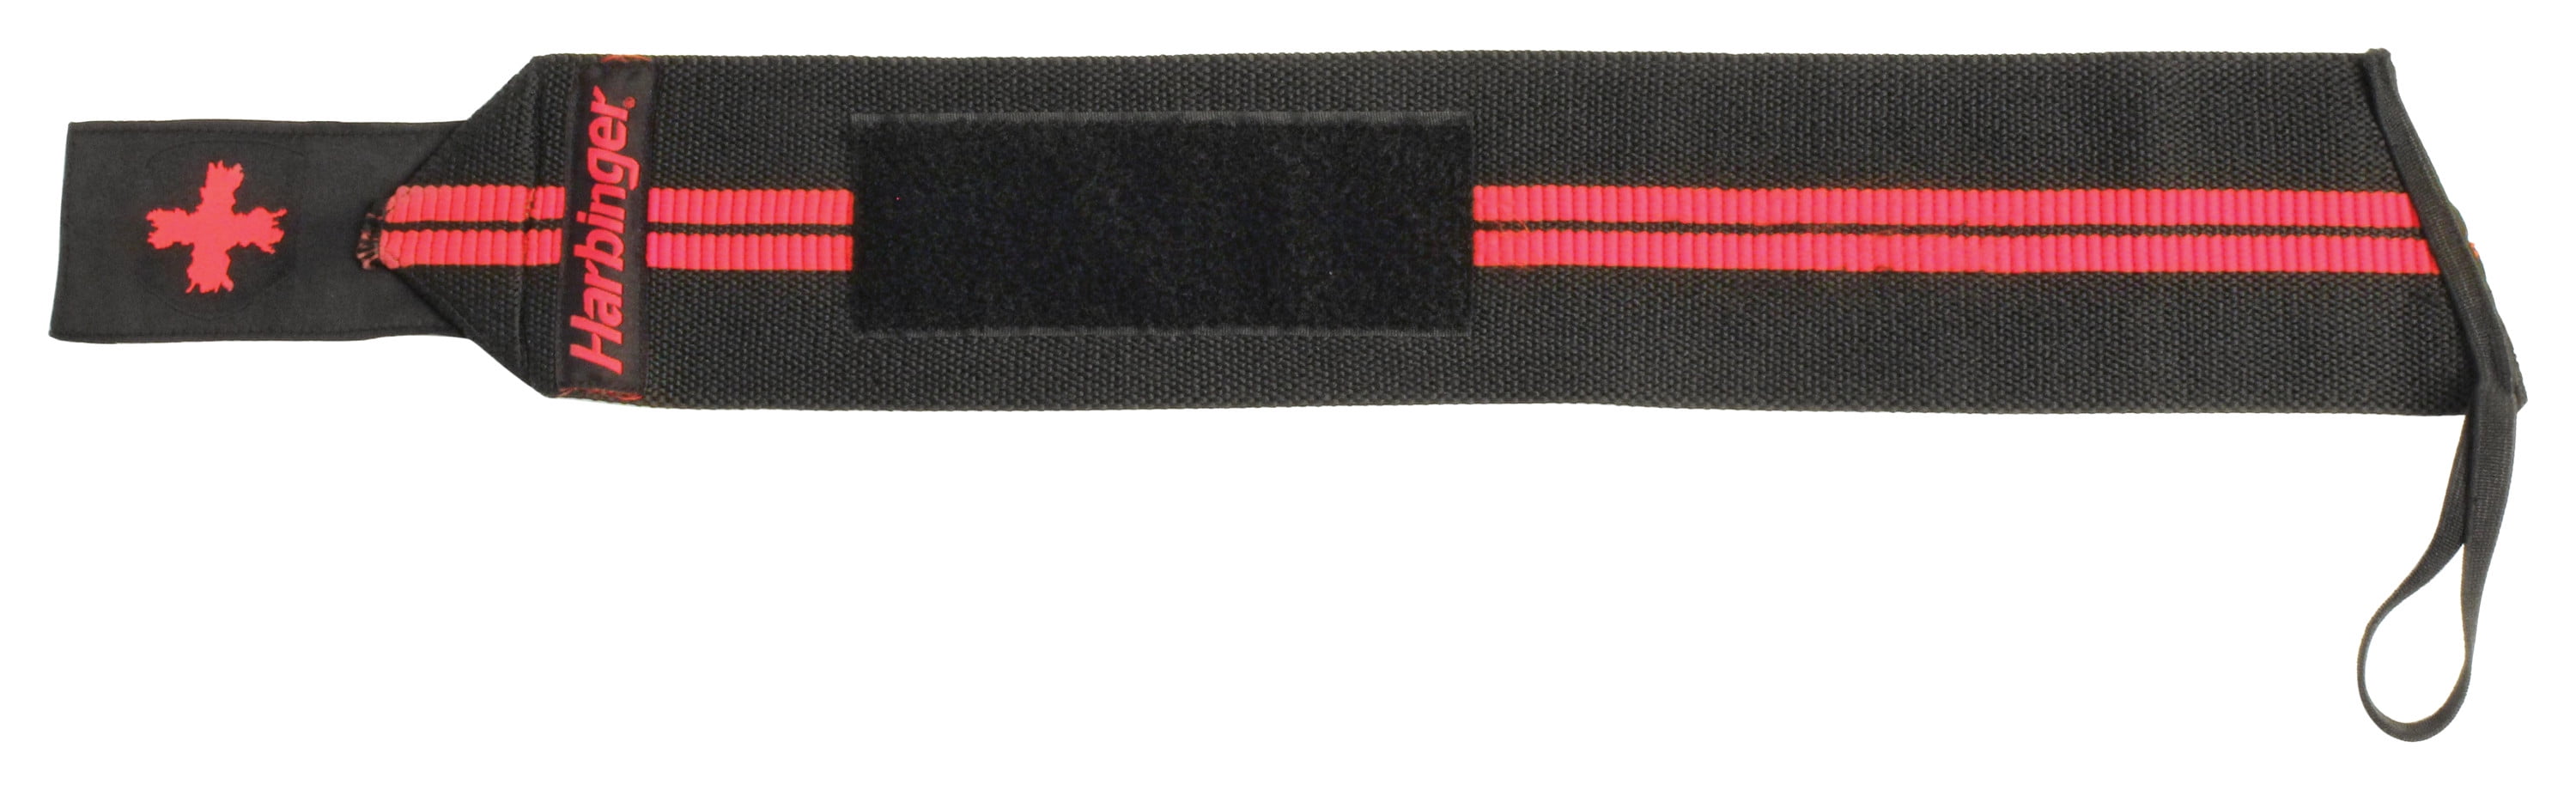 Harbinger Red Line 18" Black Wrist Wraps, Wrist and Thumb Support During Weight Lifting